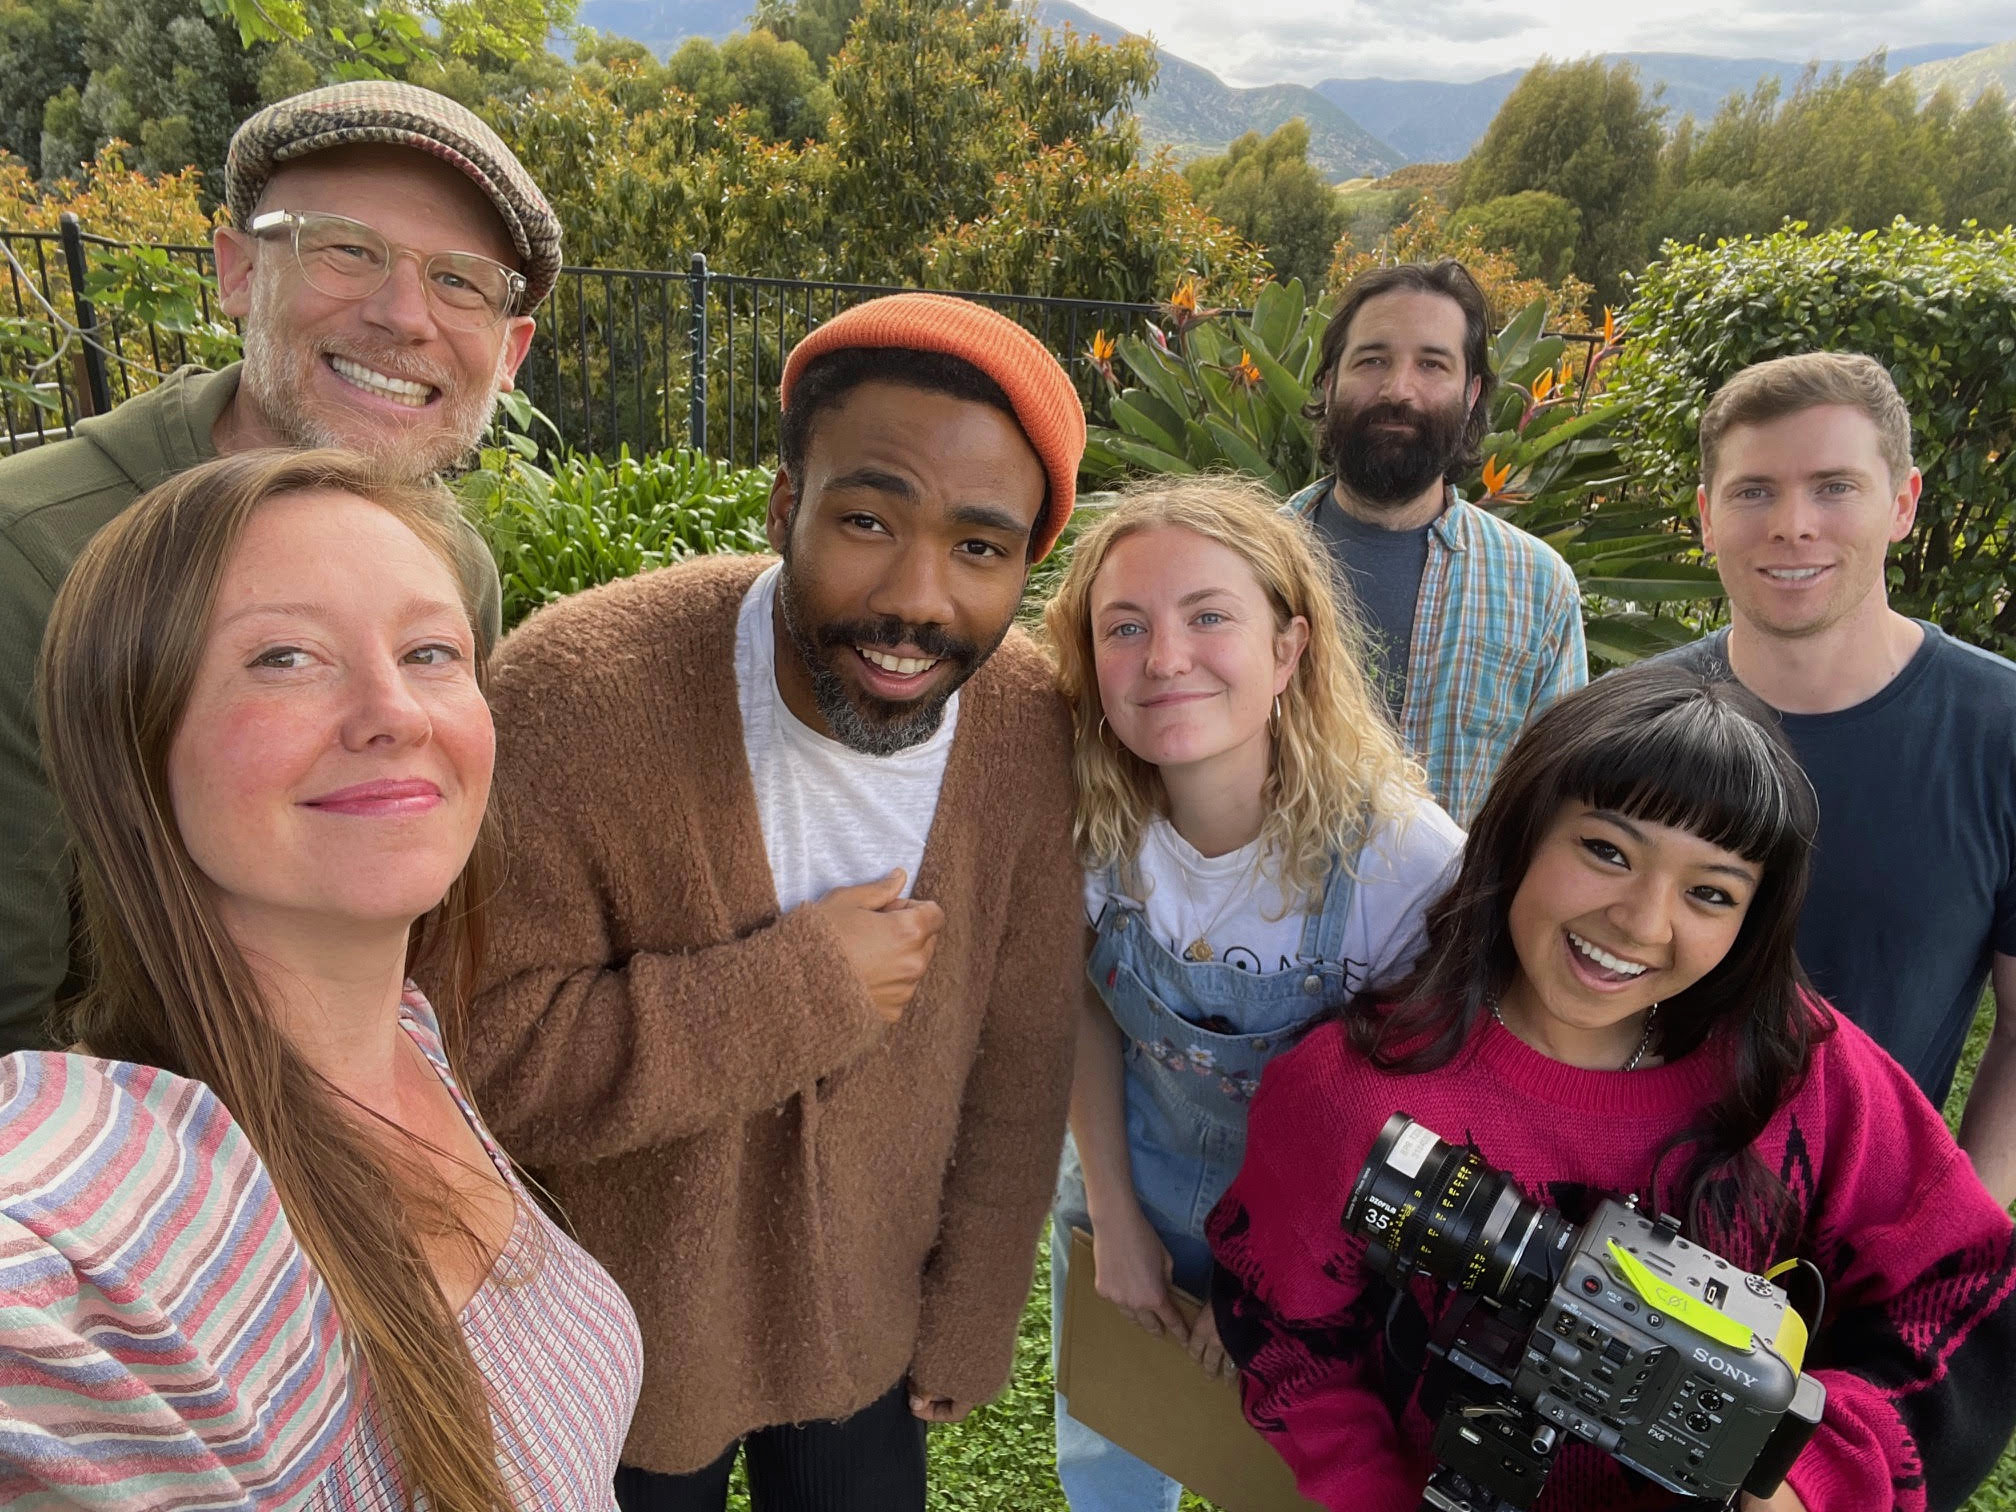 Donald Glover and others filming Common Ground